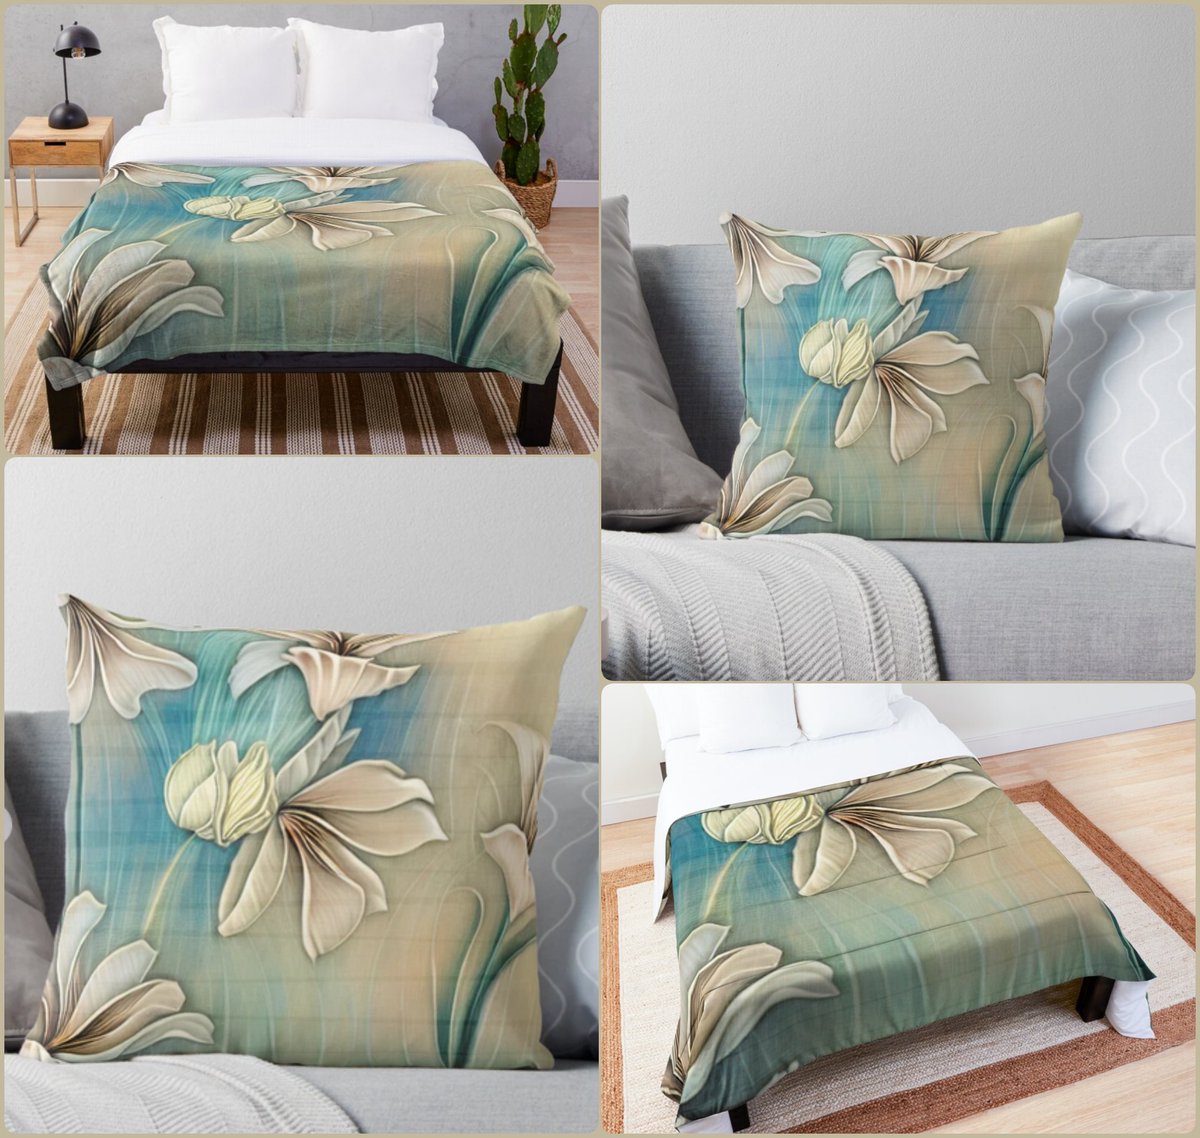 An Ode to Sentiment Throw Pillow~by Art Falaxy~
~Charming Decor~
#accents #homedecor #art #artfalaxy #bathmats #blankets #comforters #duvets #pillows #redbubble #shower #trendy #modern #gifts #FindYourThing

redbubble.com/i/throw-pillow…
Collection: redbubble.com/shop/ap/158439…